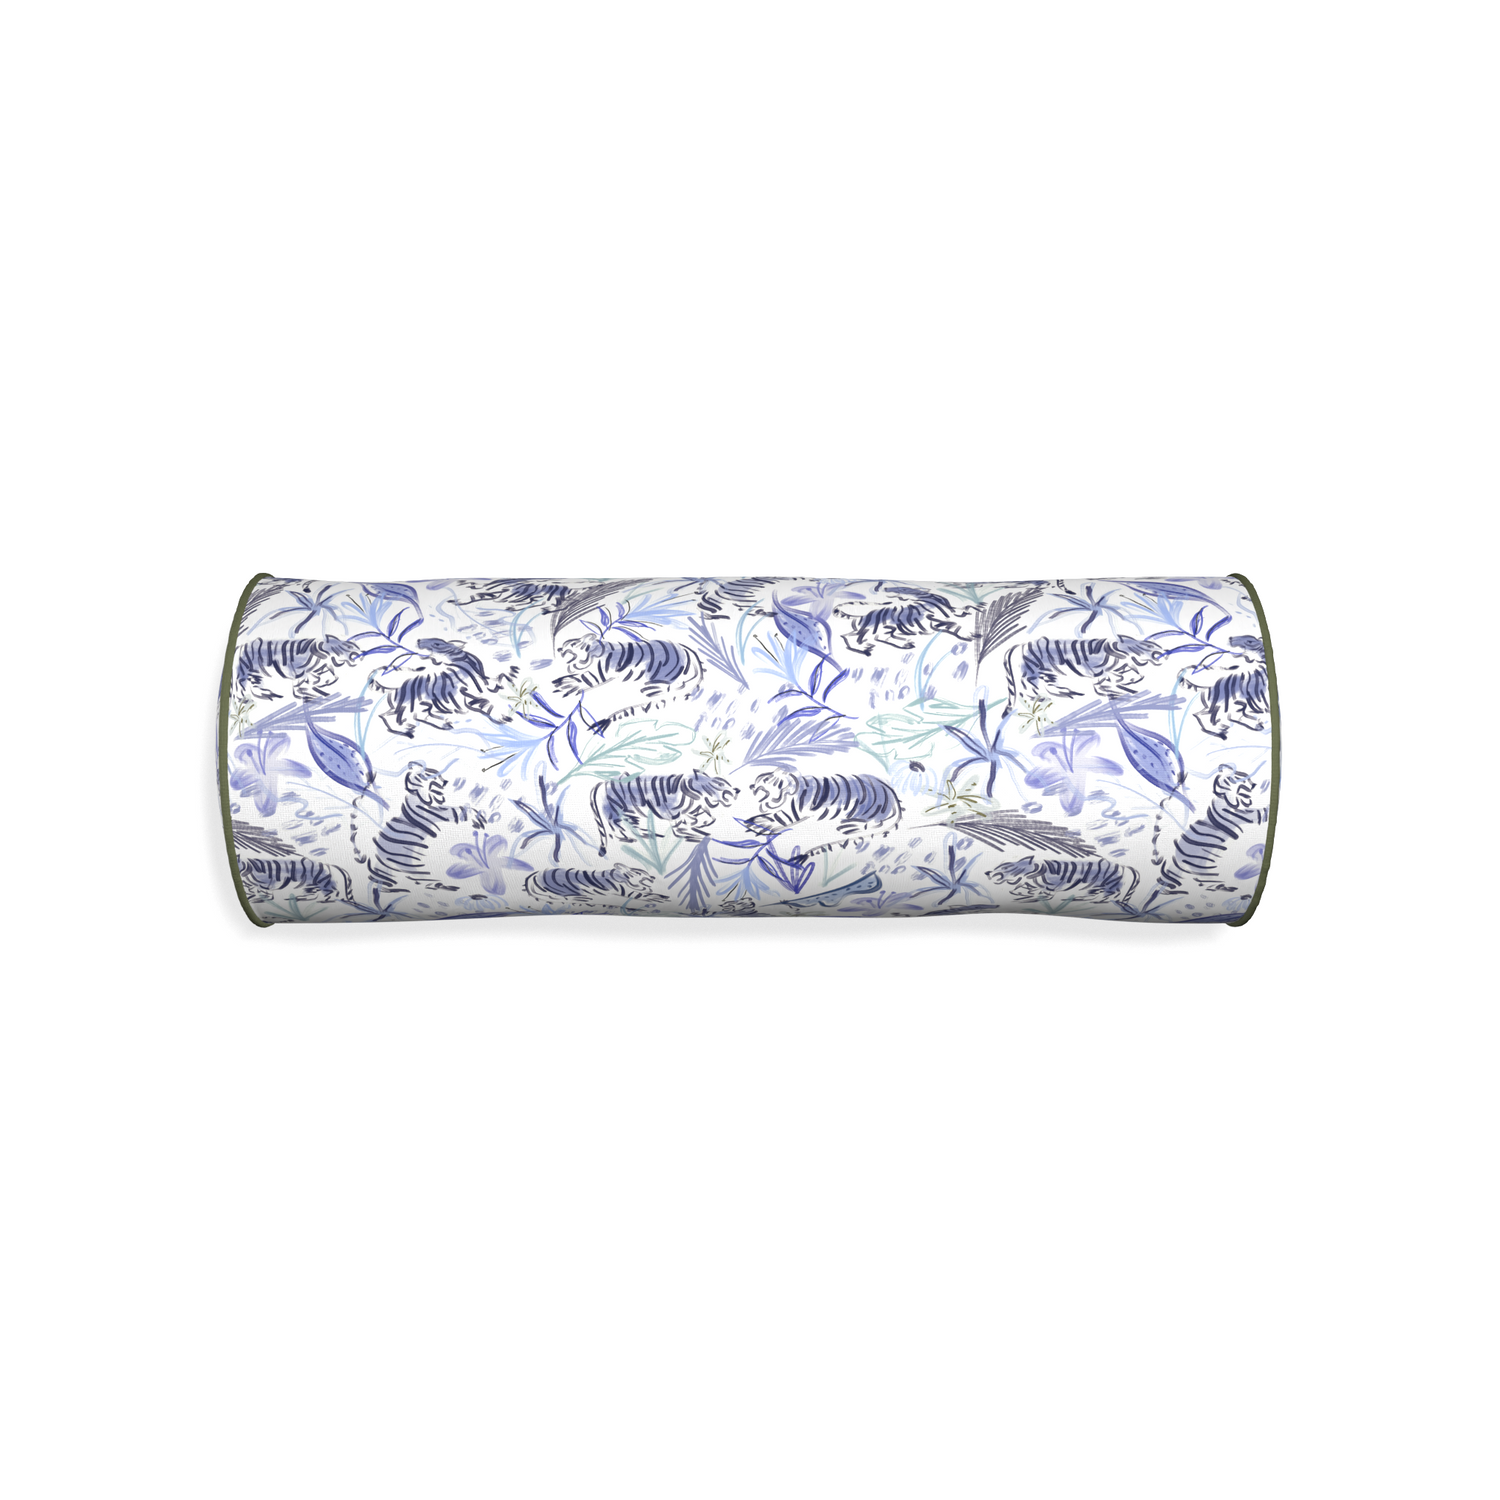 Bolster frida blue custom blue with intricate tiger designpillow with f piping on white background